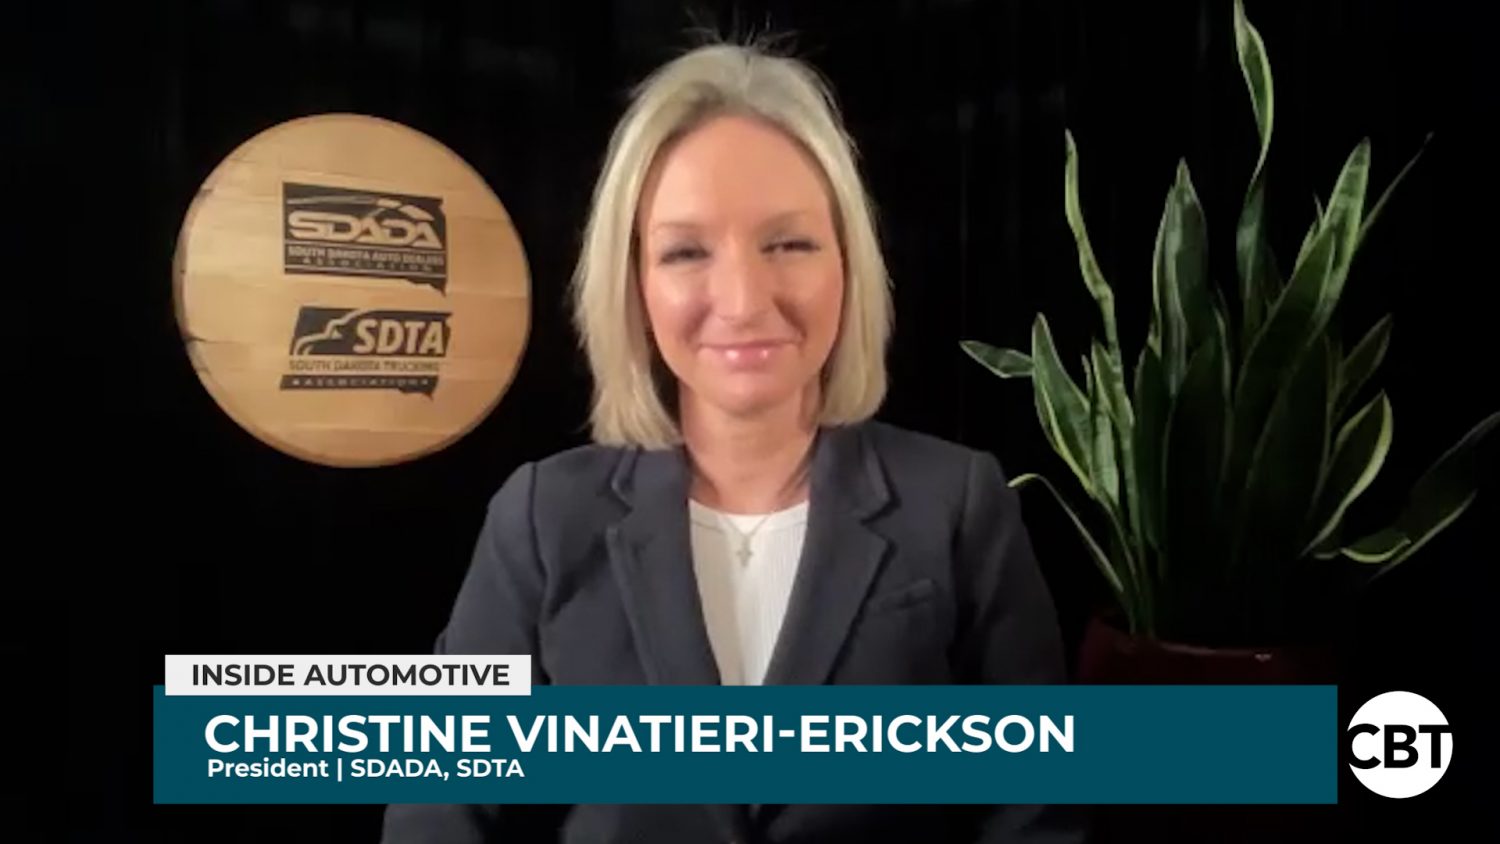 Christine Vinatieri-Erickson joins Inside Automotive to discuss how the SDADA and the SDTA are tackling issues facing dealers and truckers.